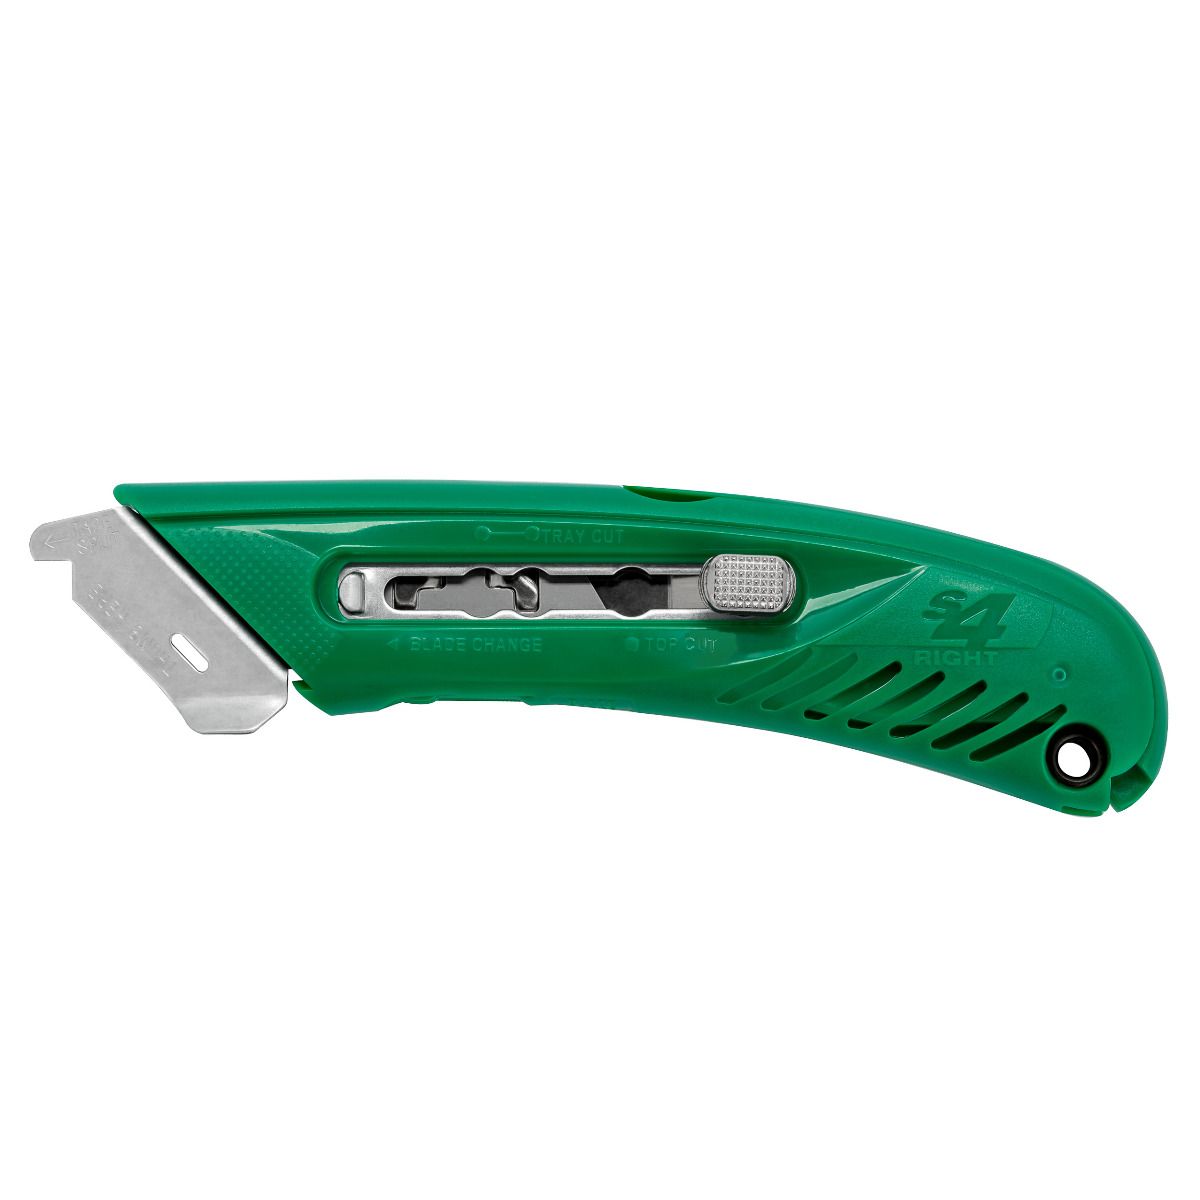 Pacific Handy Cutter S5 Safety Cutter, 3-In-1 Tool W/ Metal Fixed Guard 